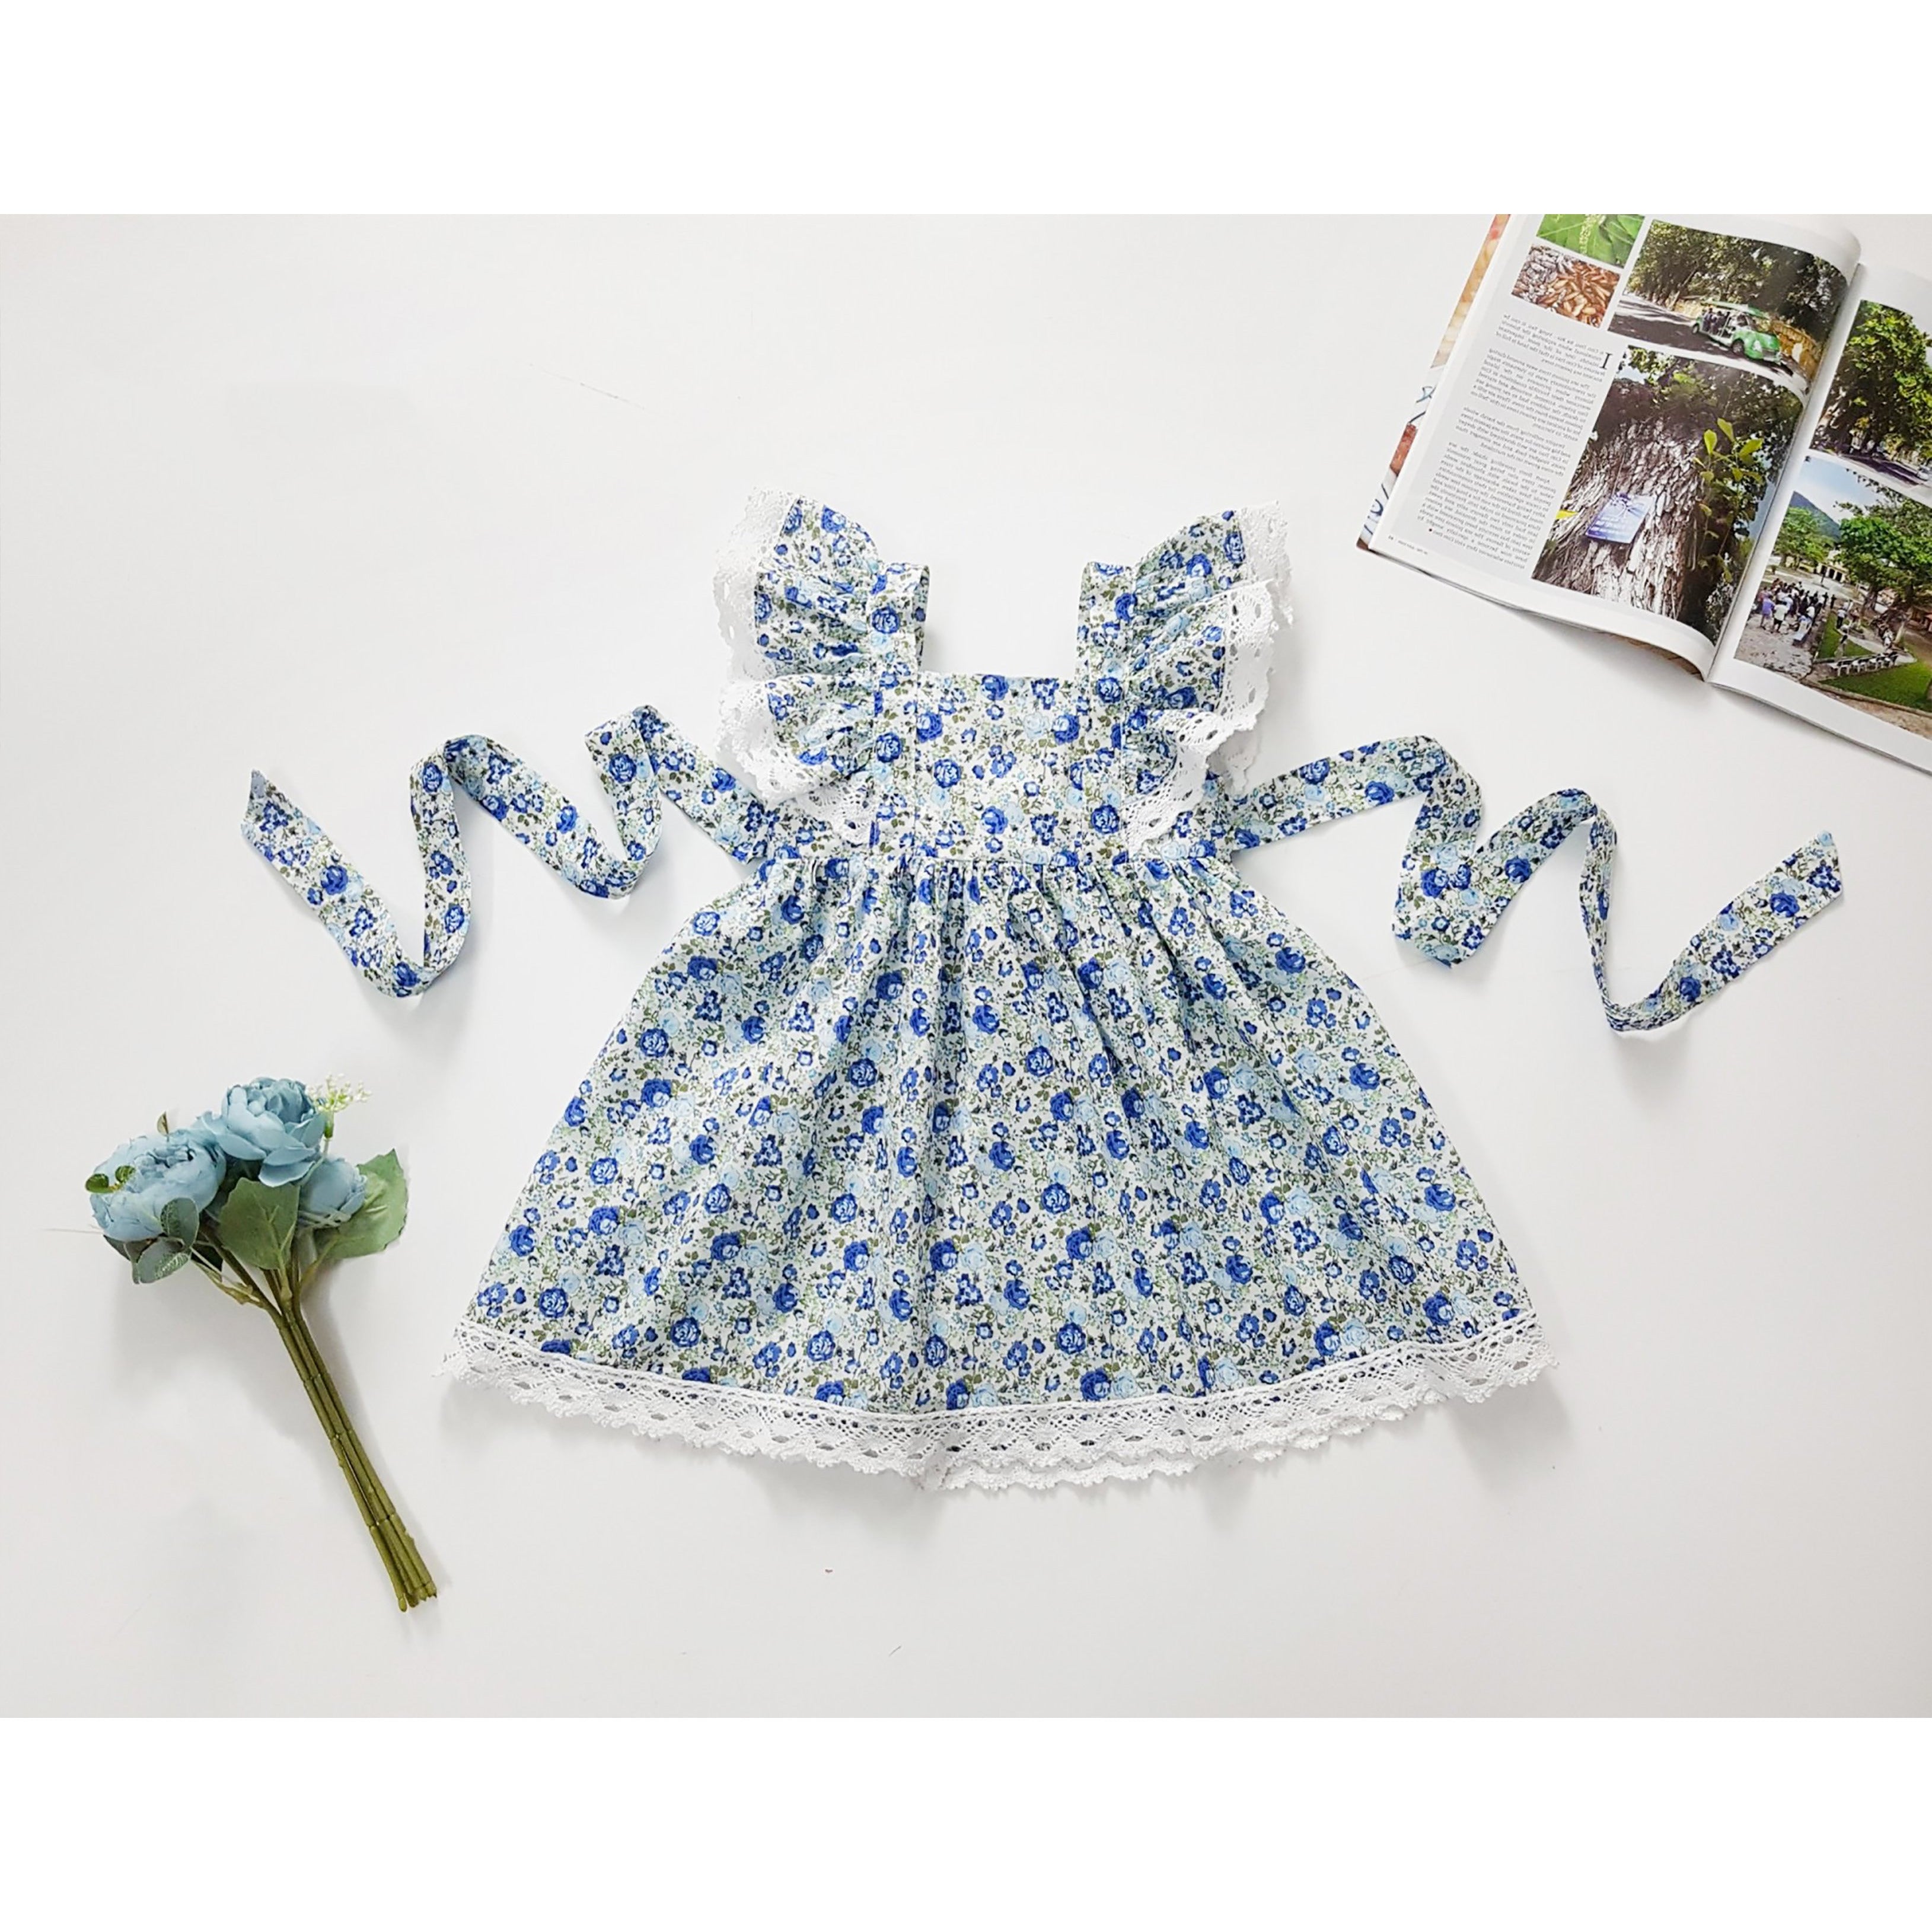 Baby Toddler Little Girls Spring Summer Flutter Sleeves Ruffle Lace Cotton Woven Dress - Navy Floral - Angeline Kids